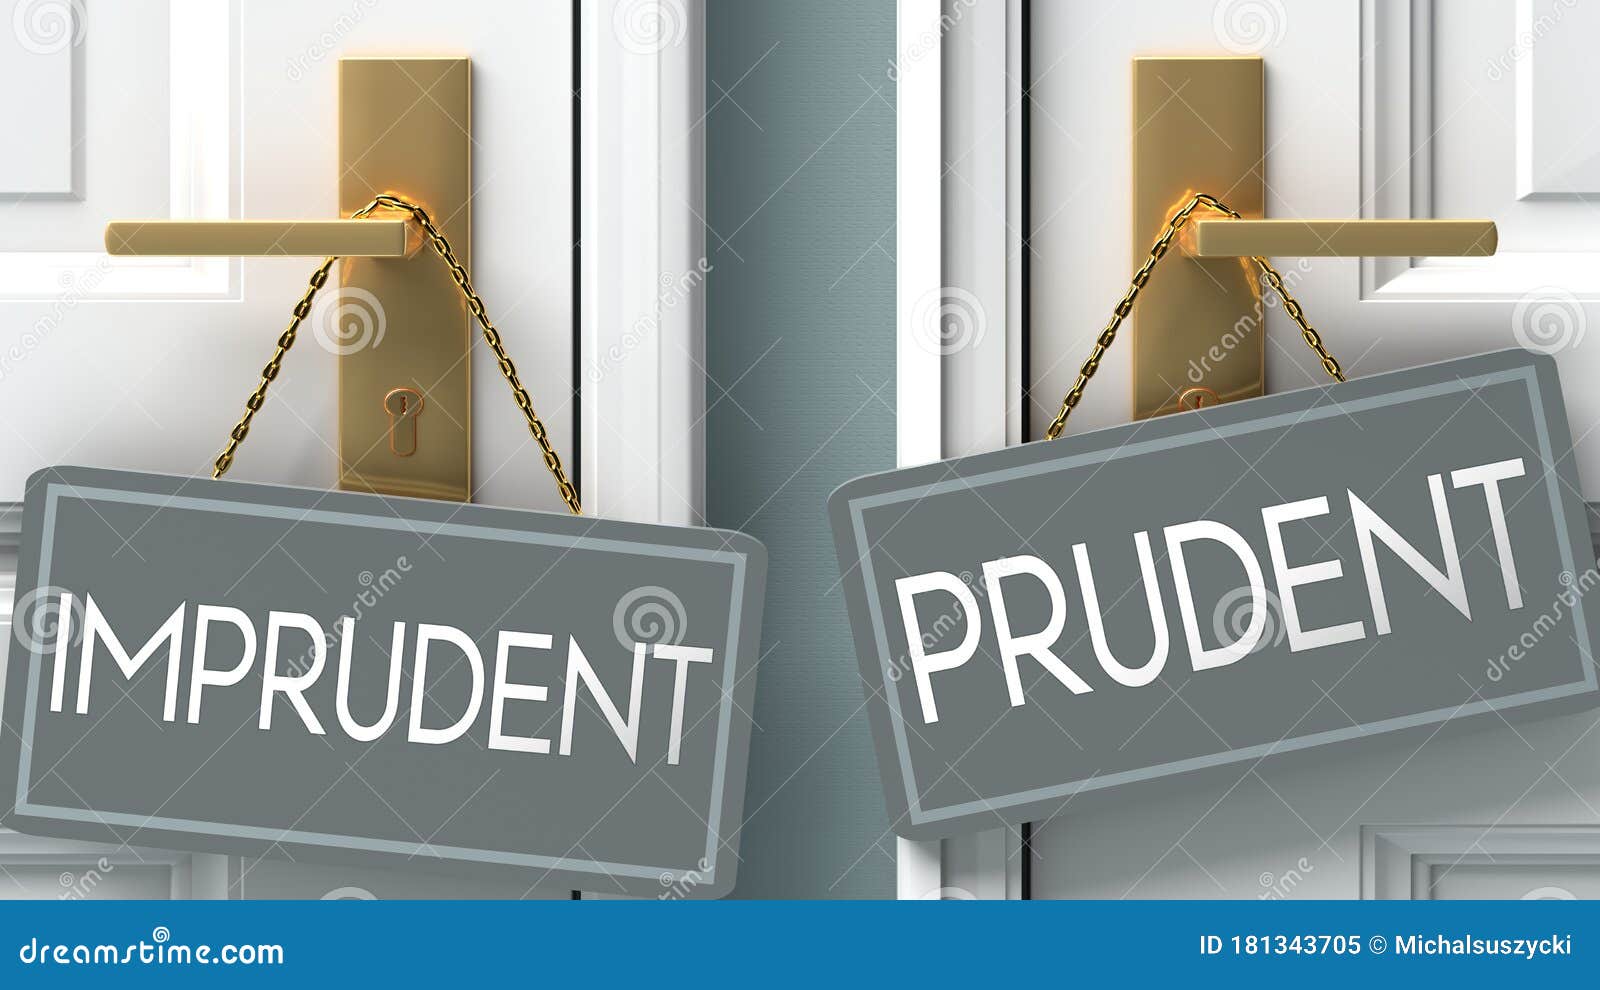 prudent or imprudent as a choice in life - pictured as words imprudent, prudent on doors to show that imprudent and prudent are